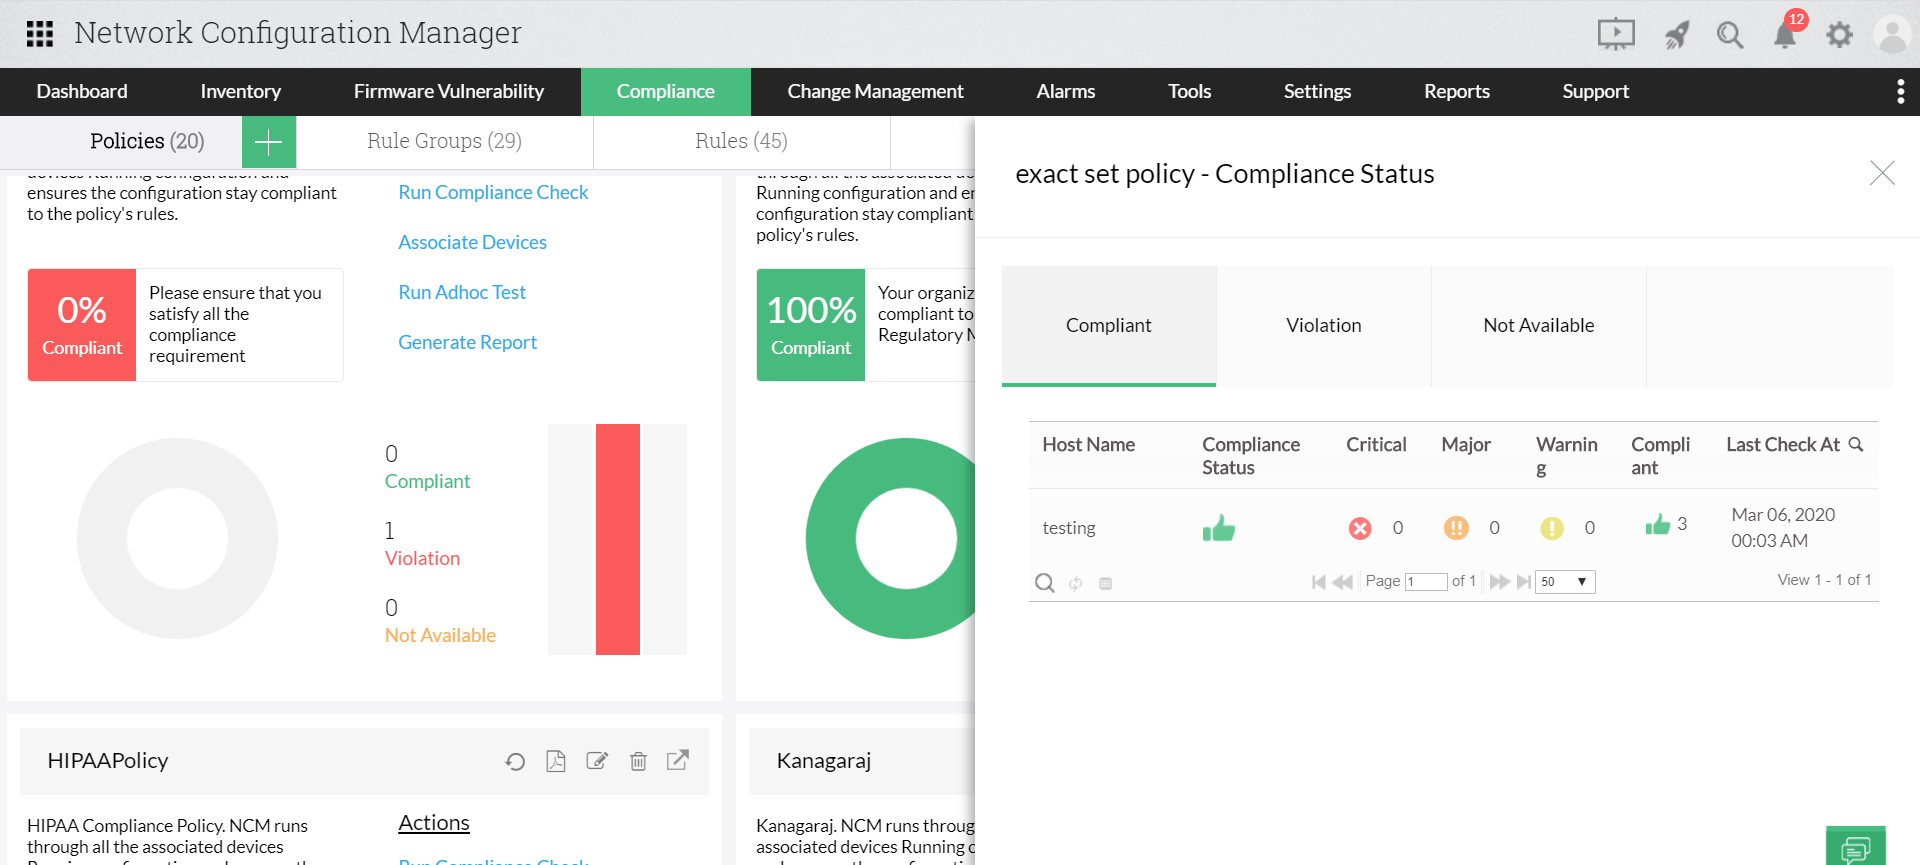 Audit compliance in Siemens Configurations - ManageEngine Network Configuration Manager